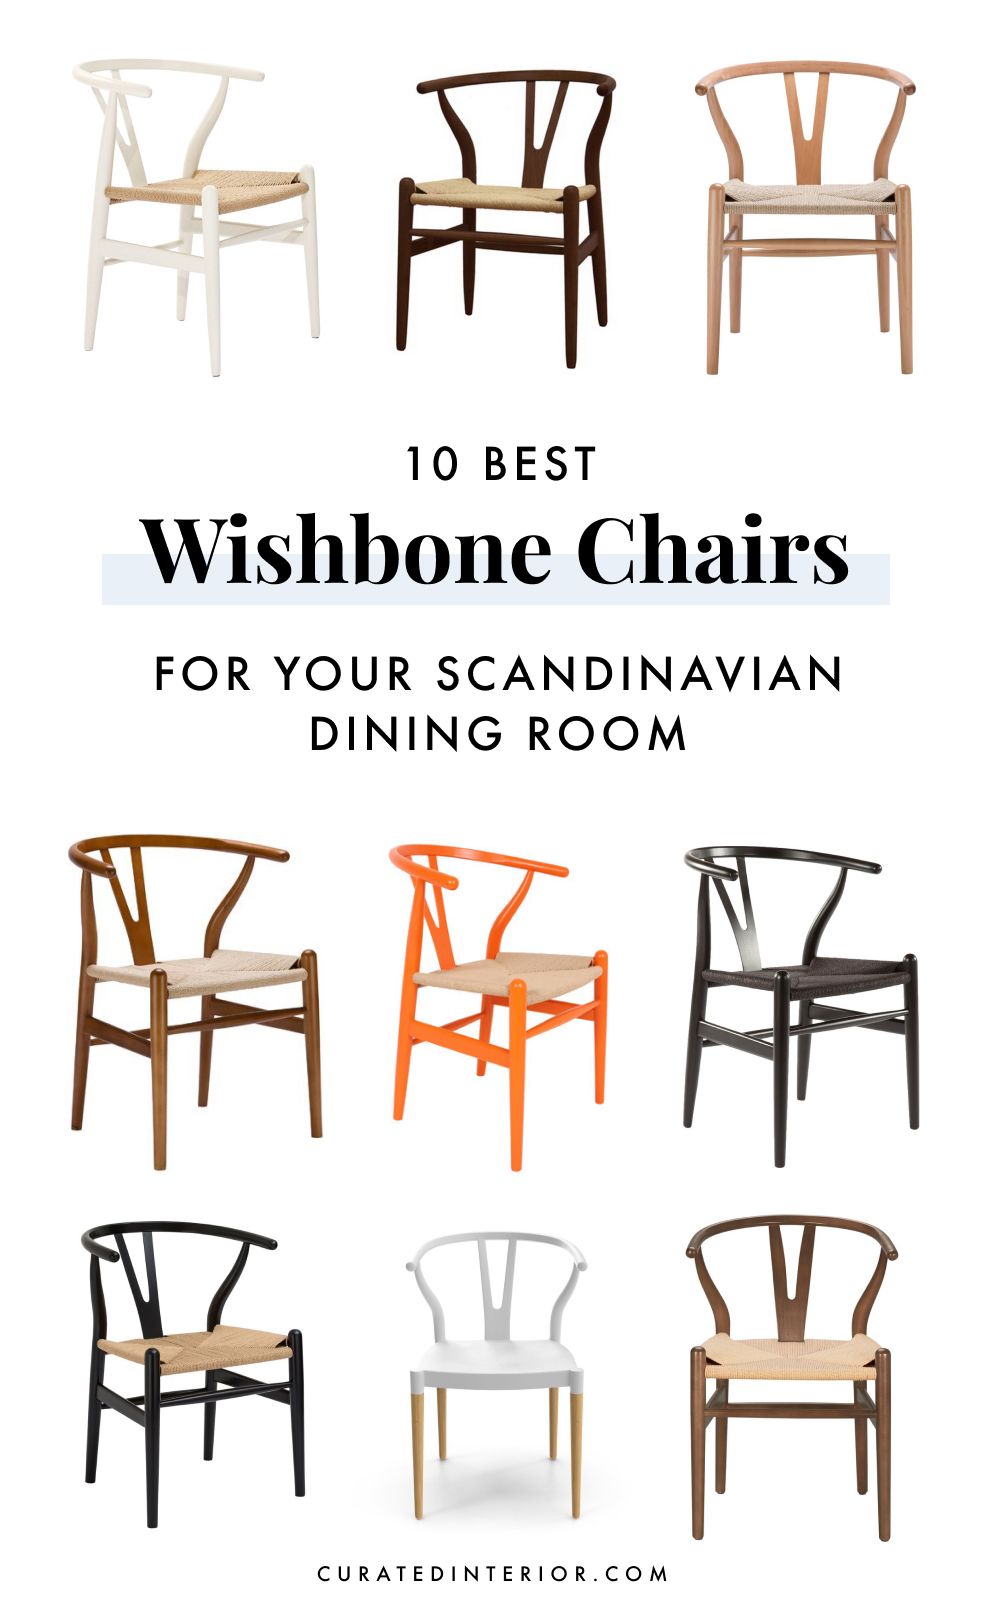 10 Best Wishbone Chairs for Your Scandinavian Dining Room